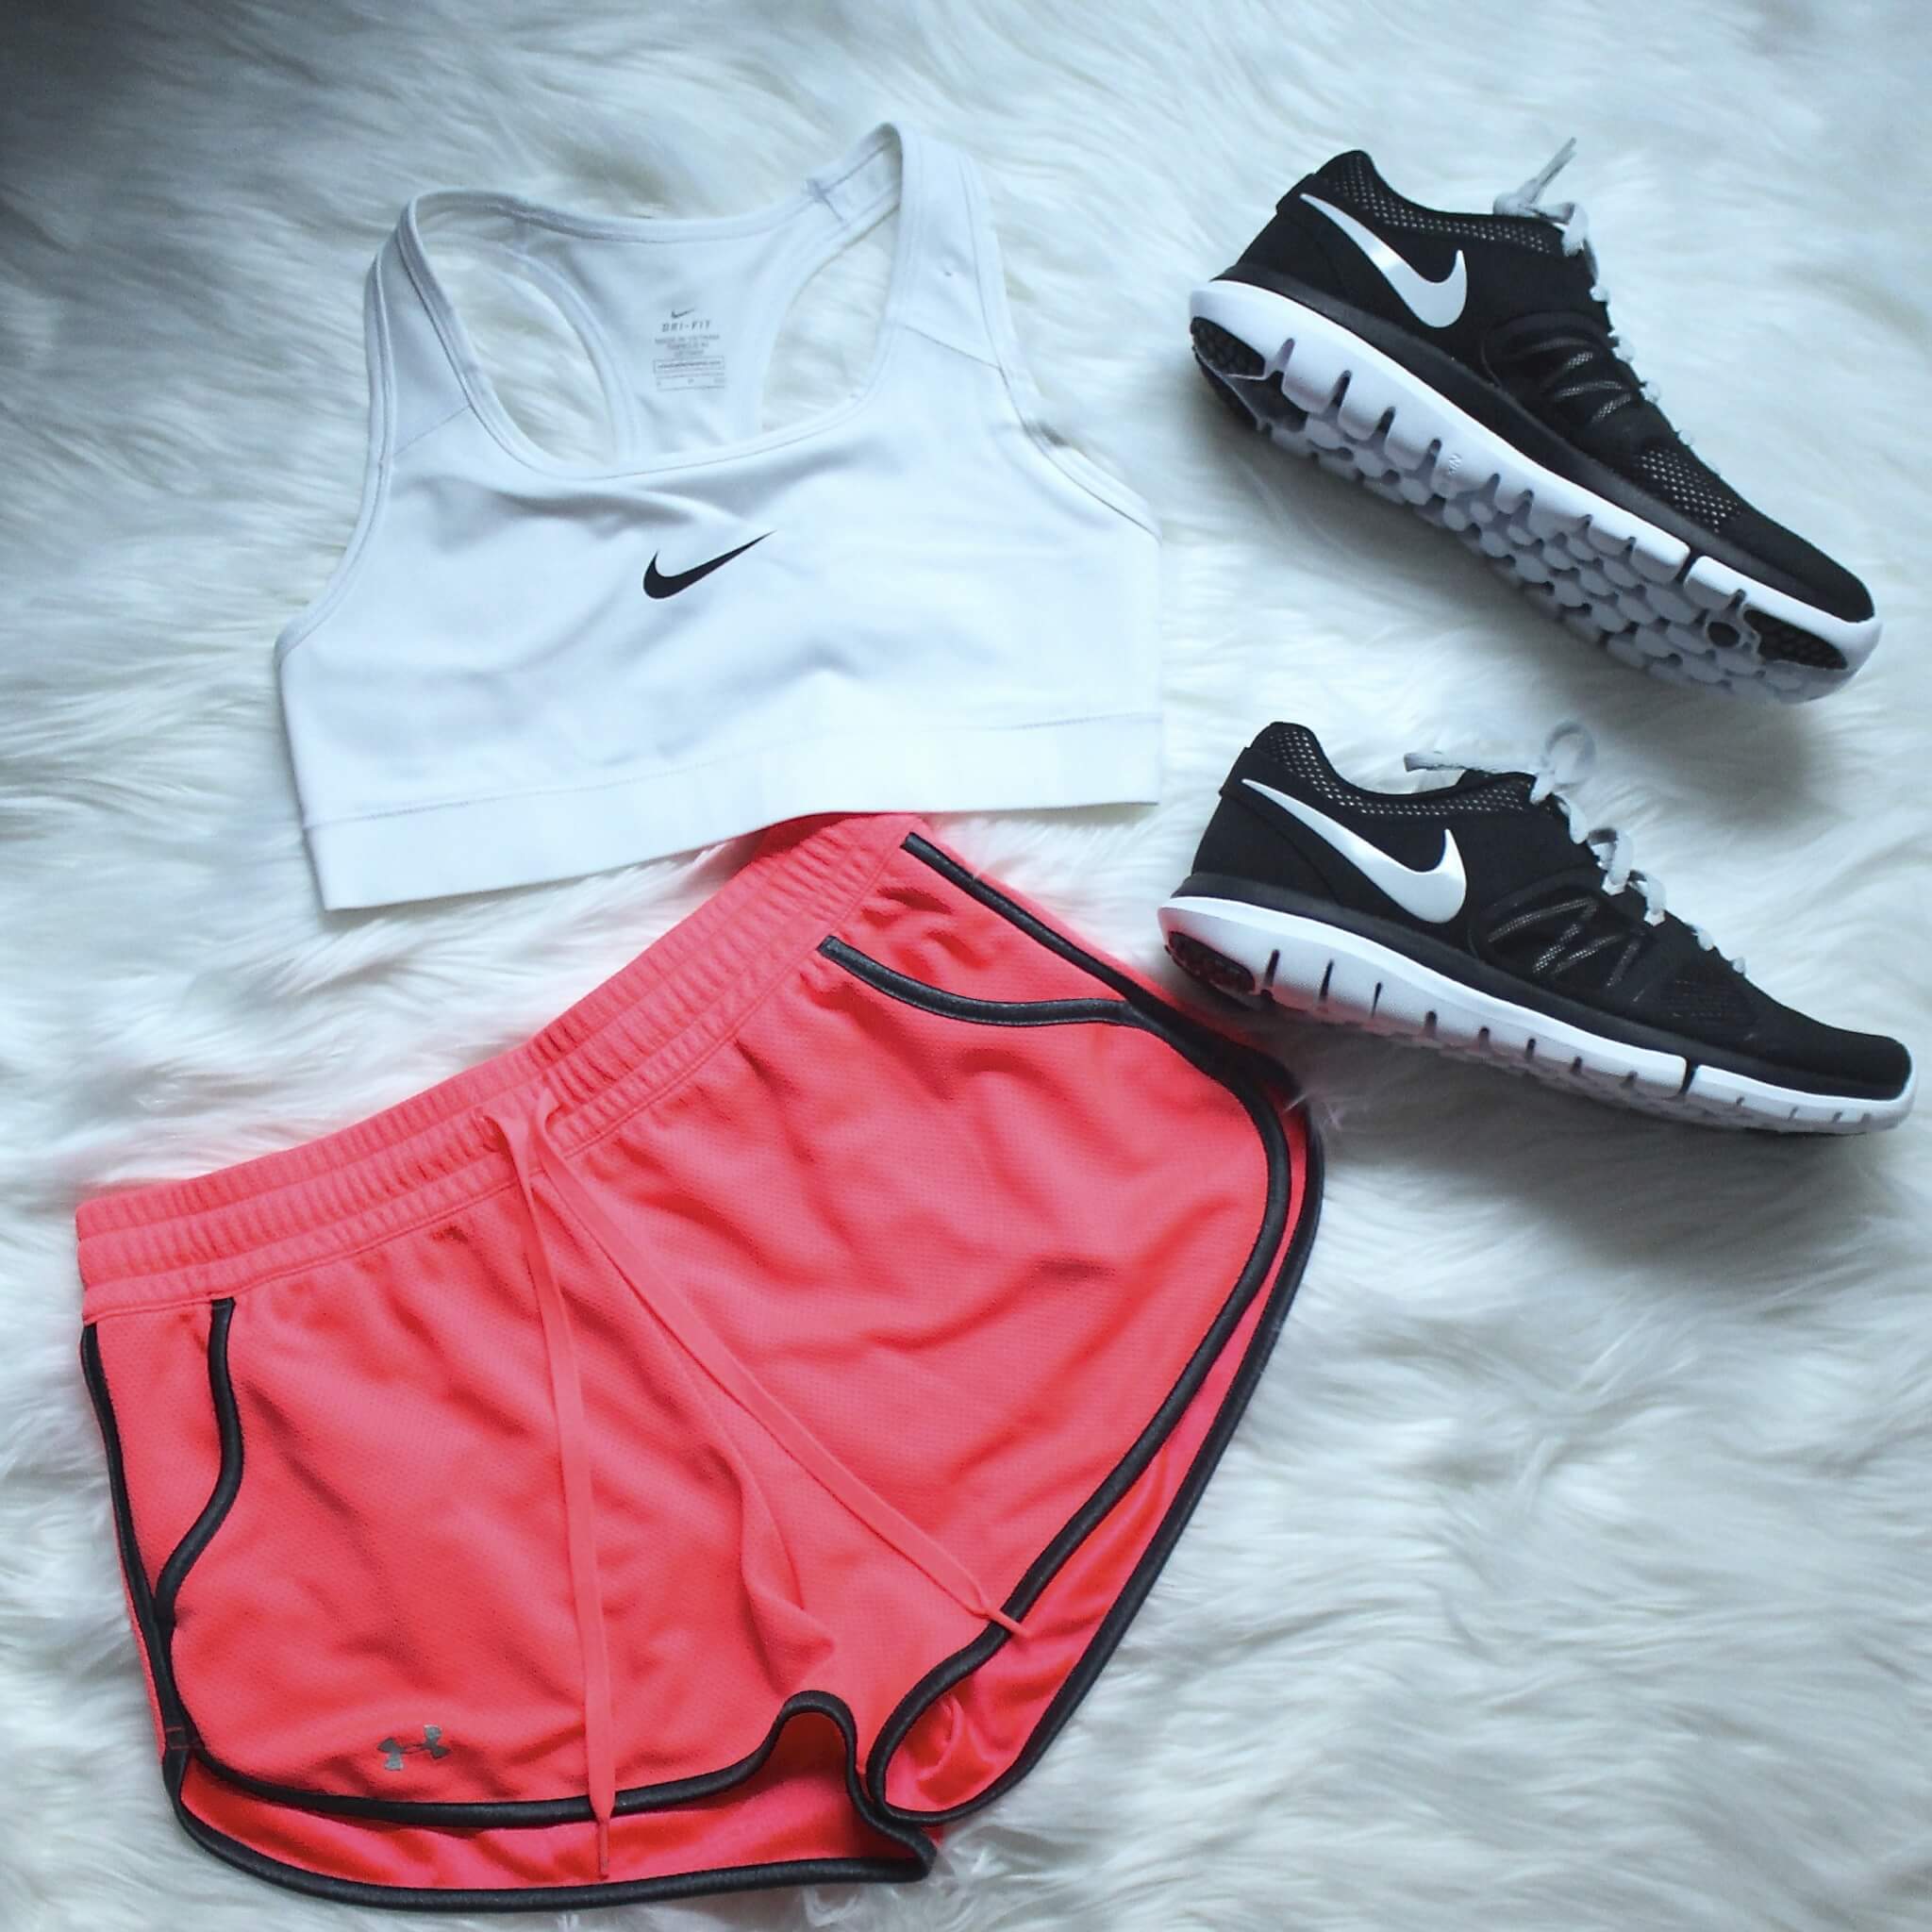 Fitness Fashion Finds - Be a Fit Fashionista on a Budget